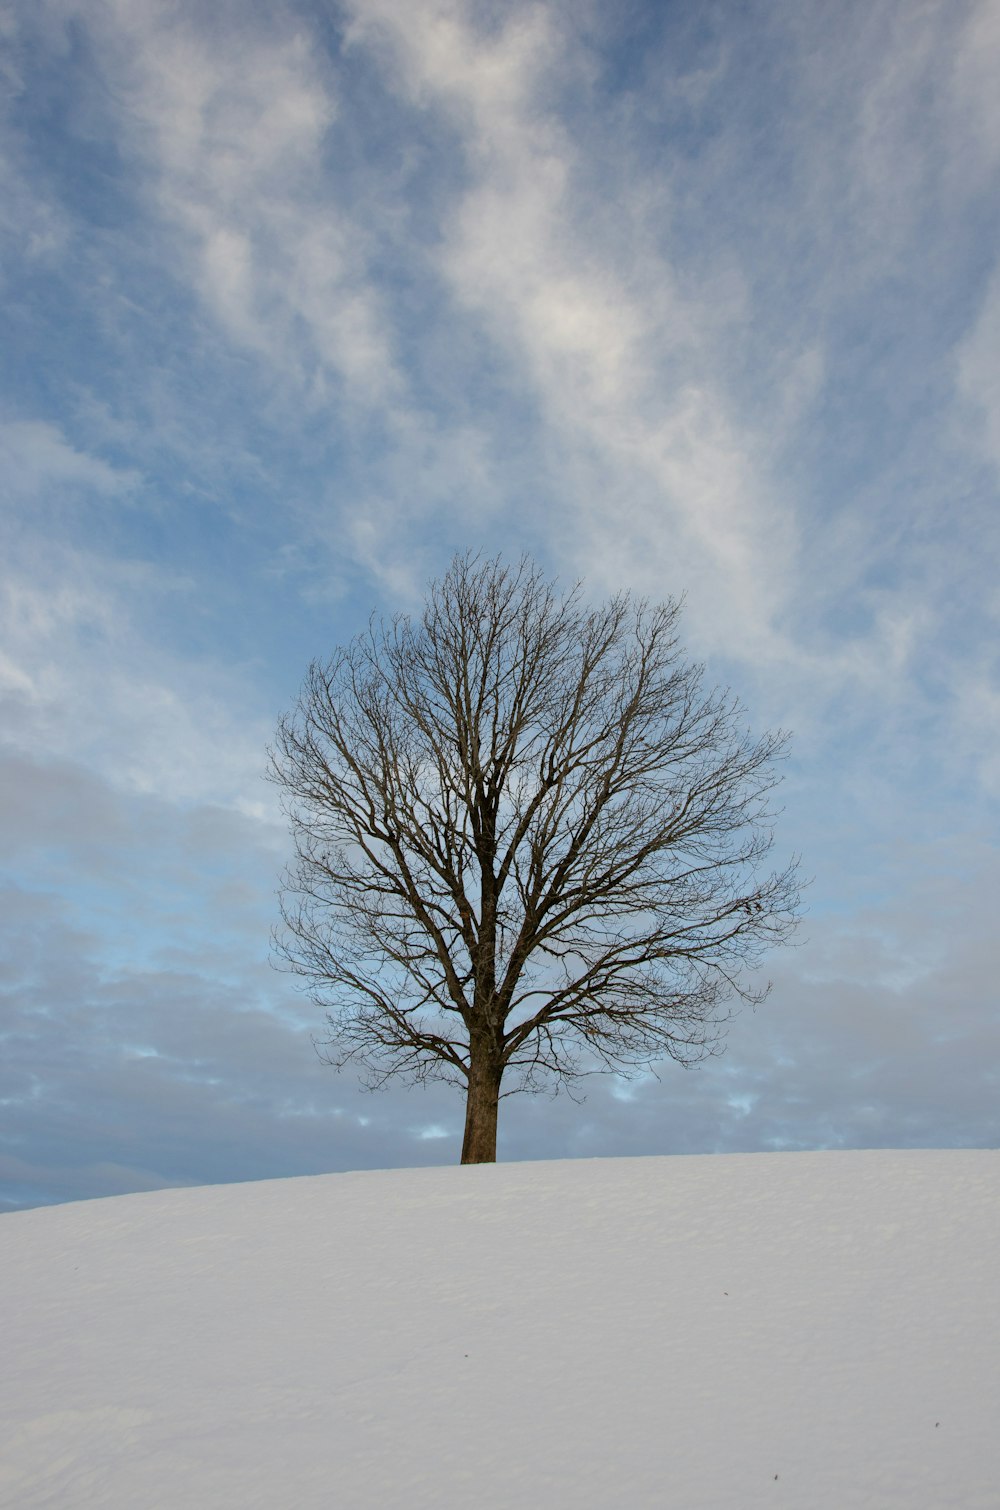 leafless tree on snow covered ground under white cloudy sky during daytime